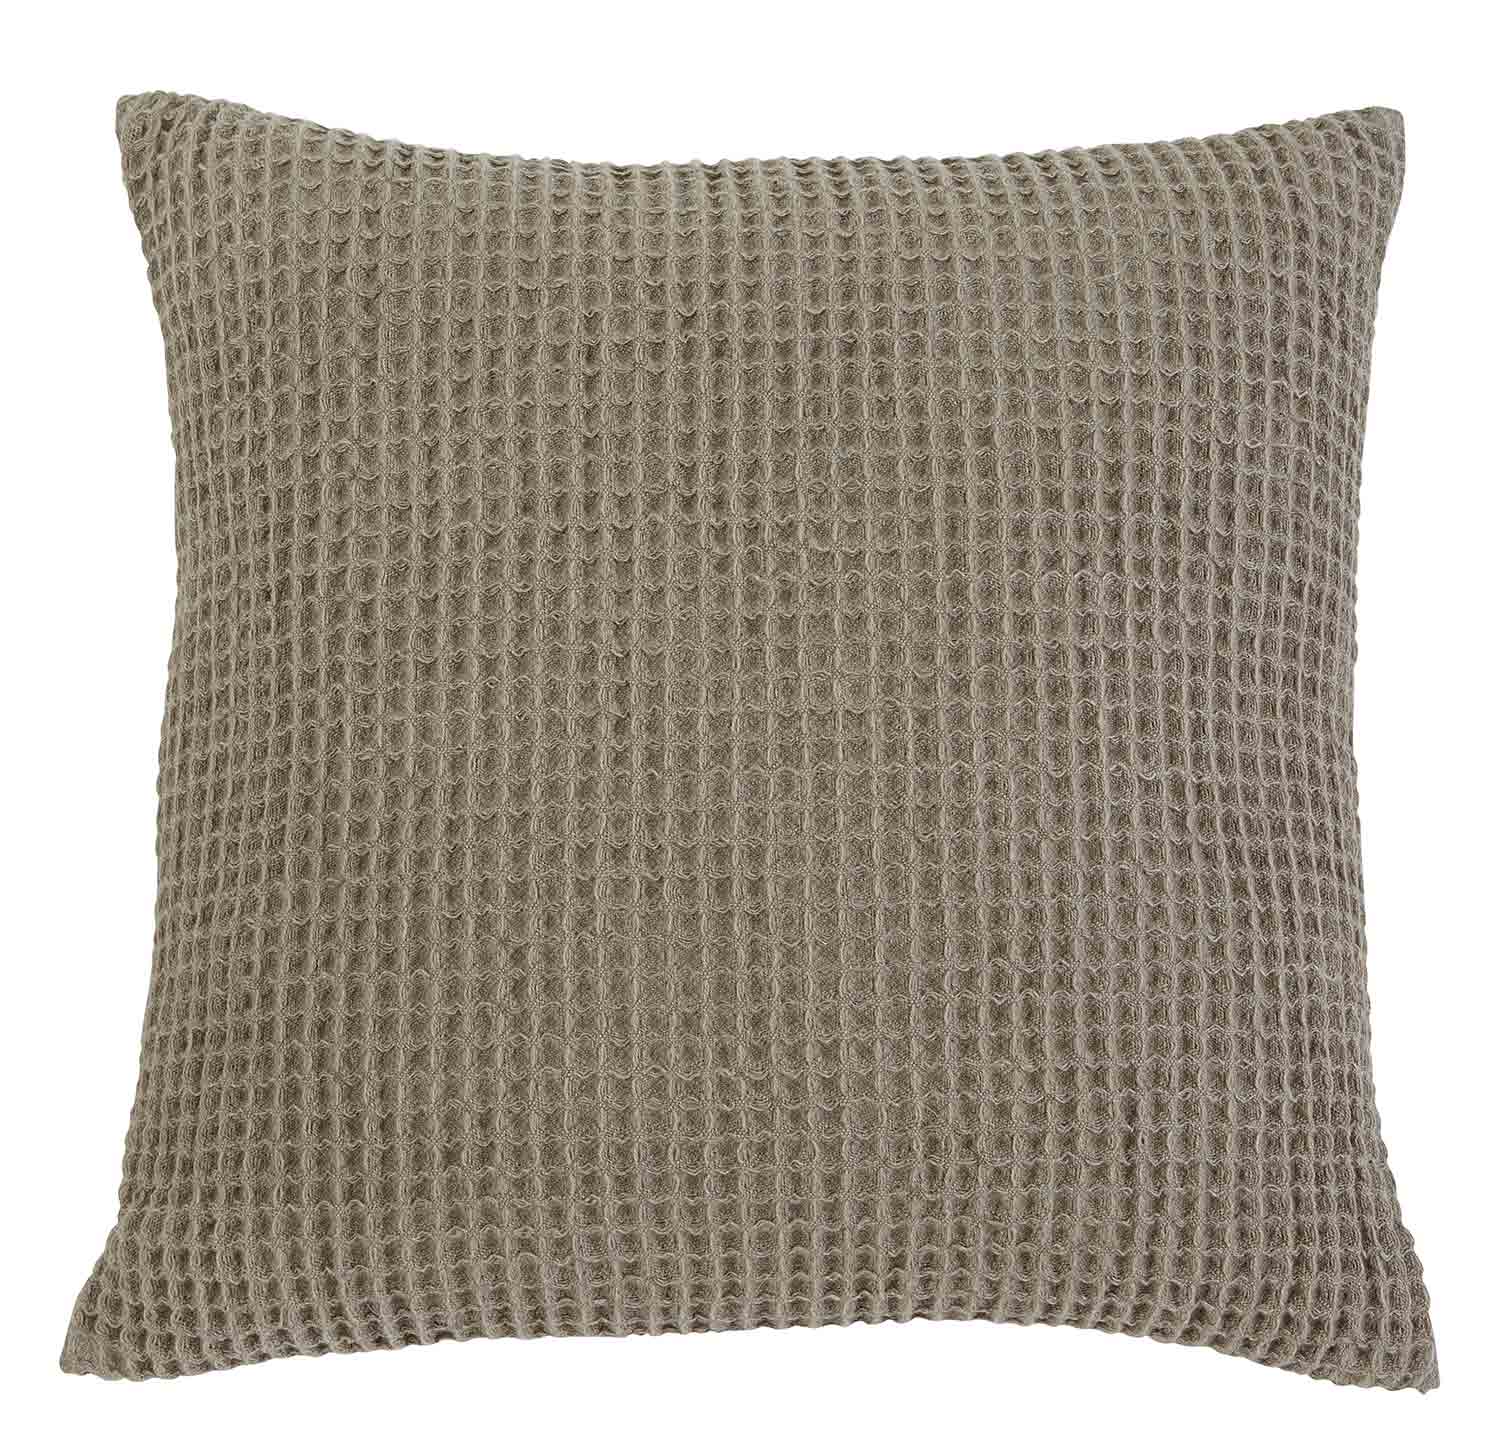 Ashley Patterned Pillow Cover - Brown